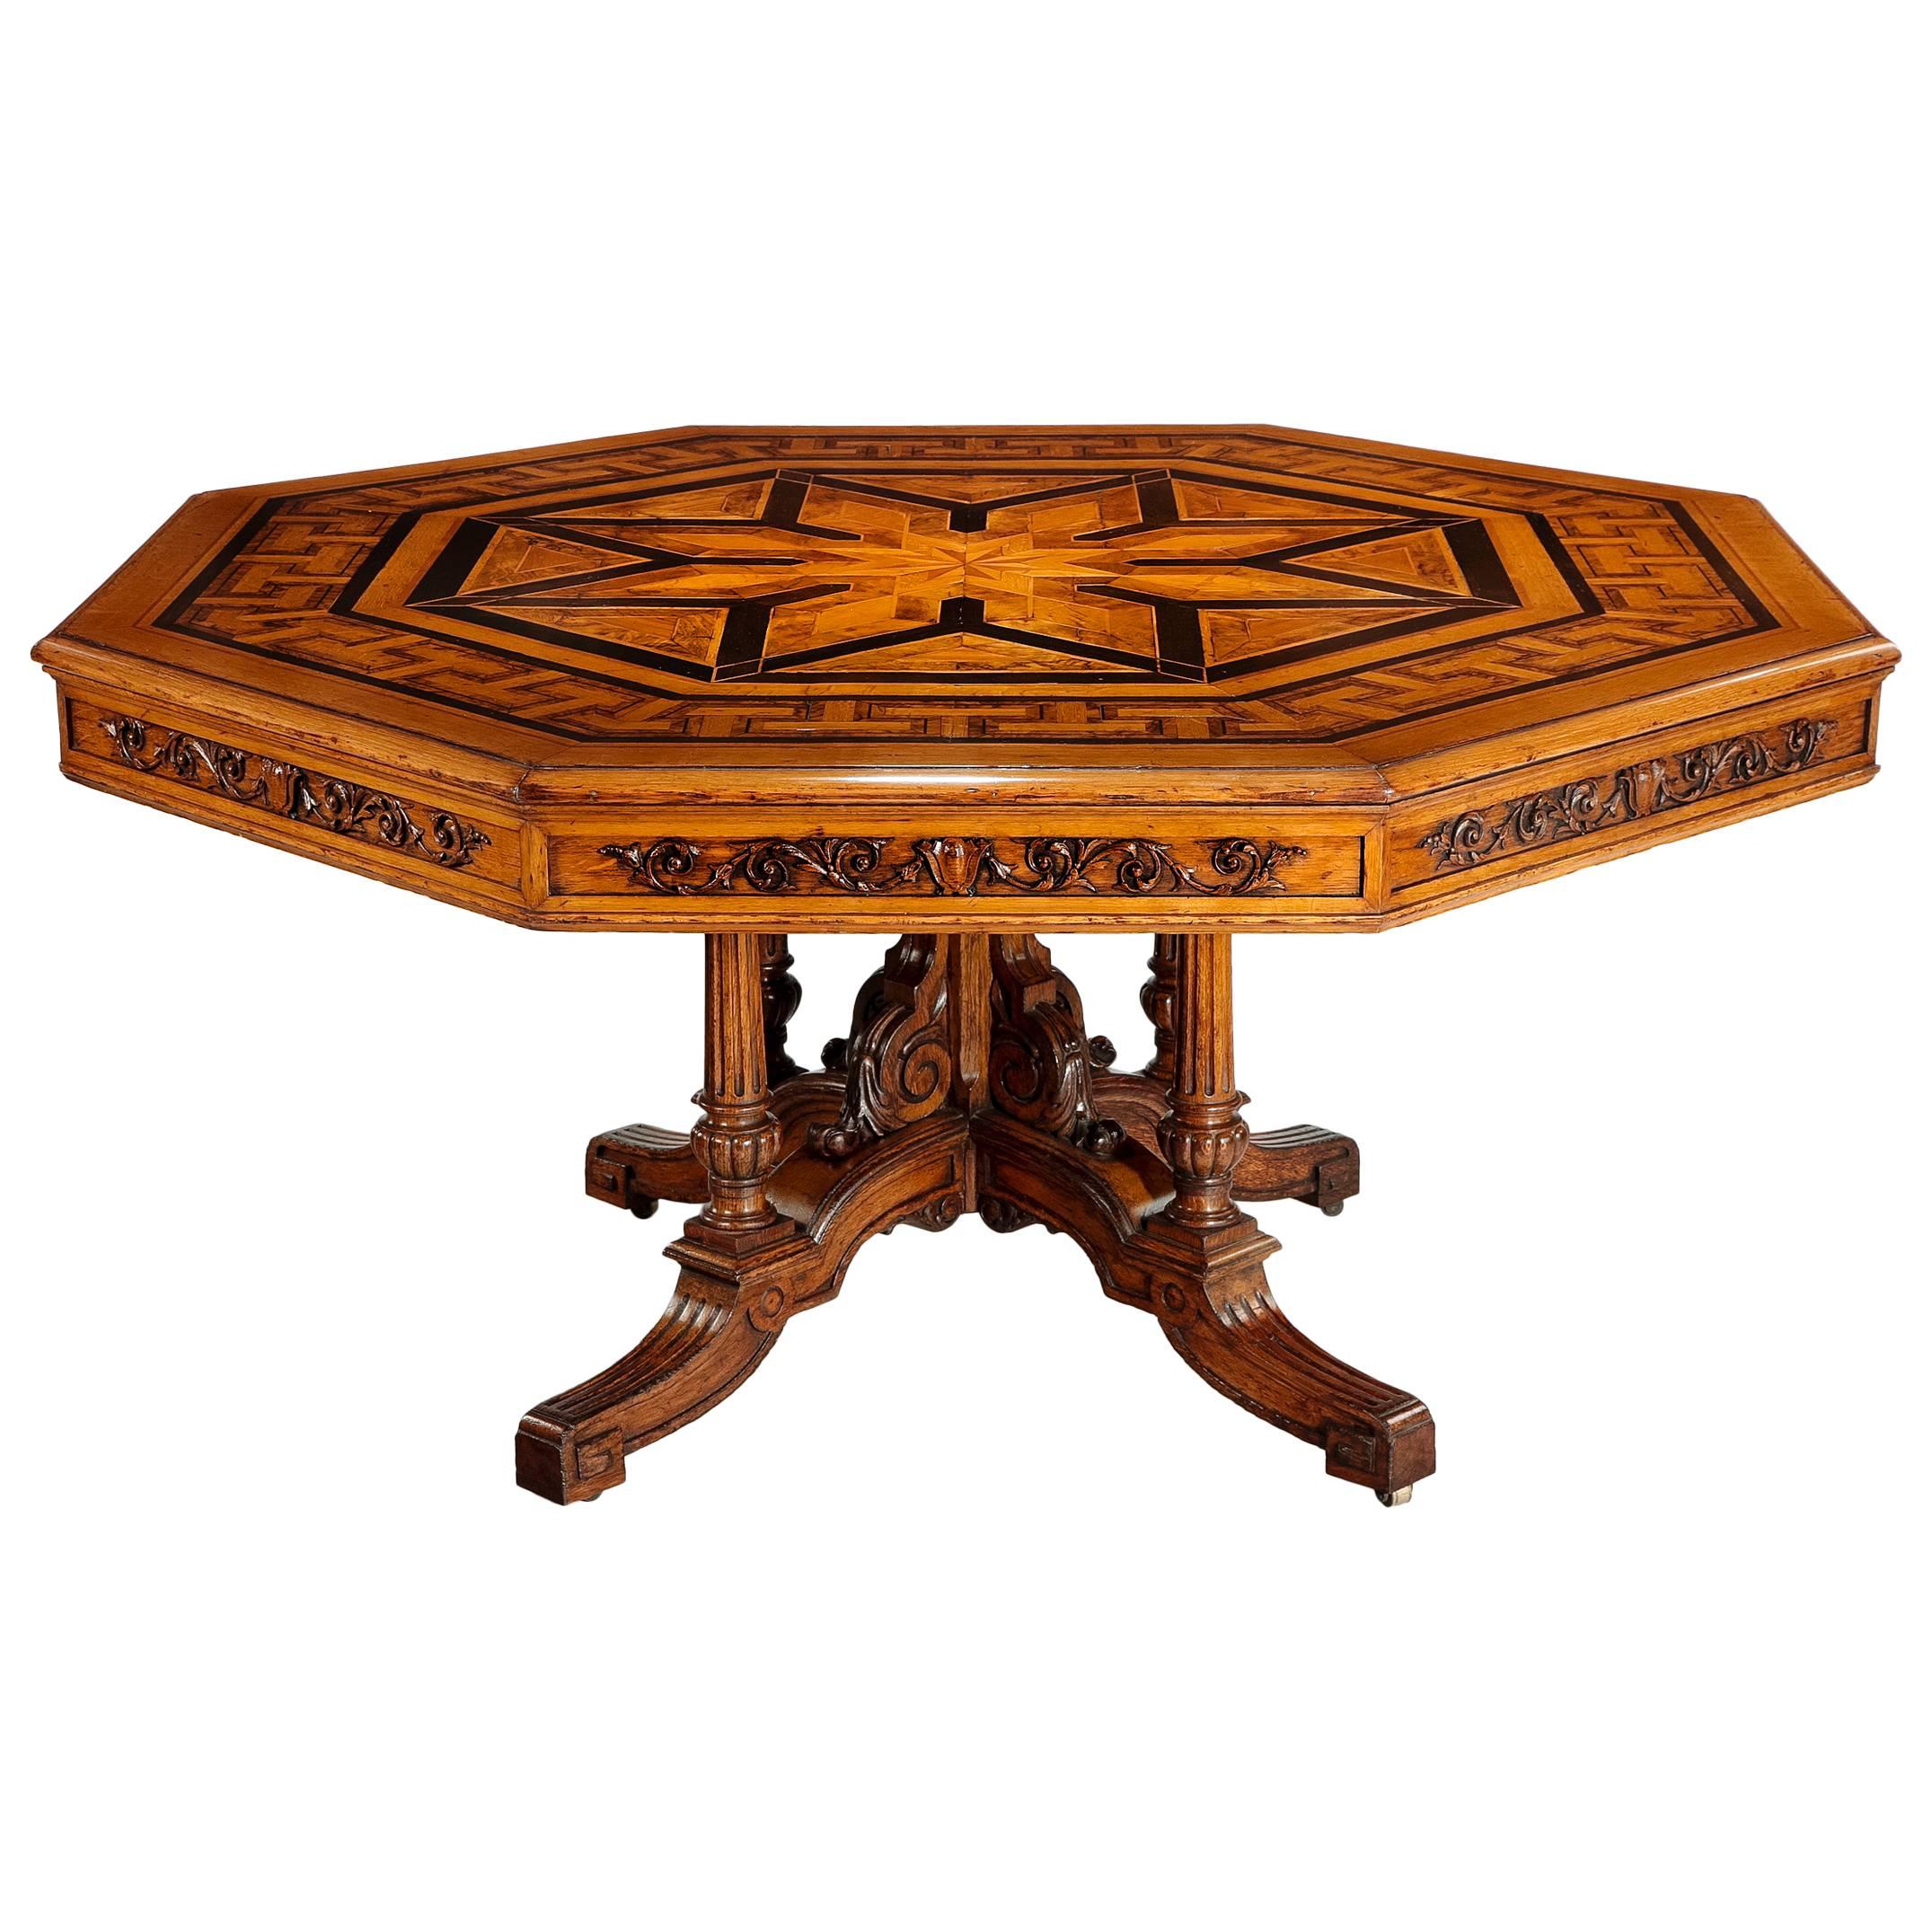 Superb Large 19th Century Octagonal Parquetry Inlaid Centre or Dining Table For Sale